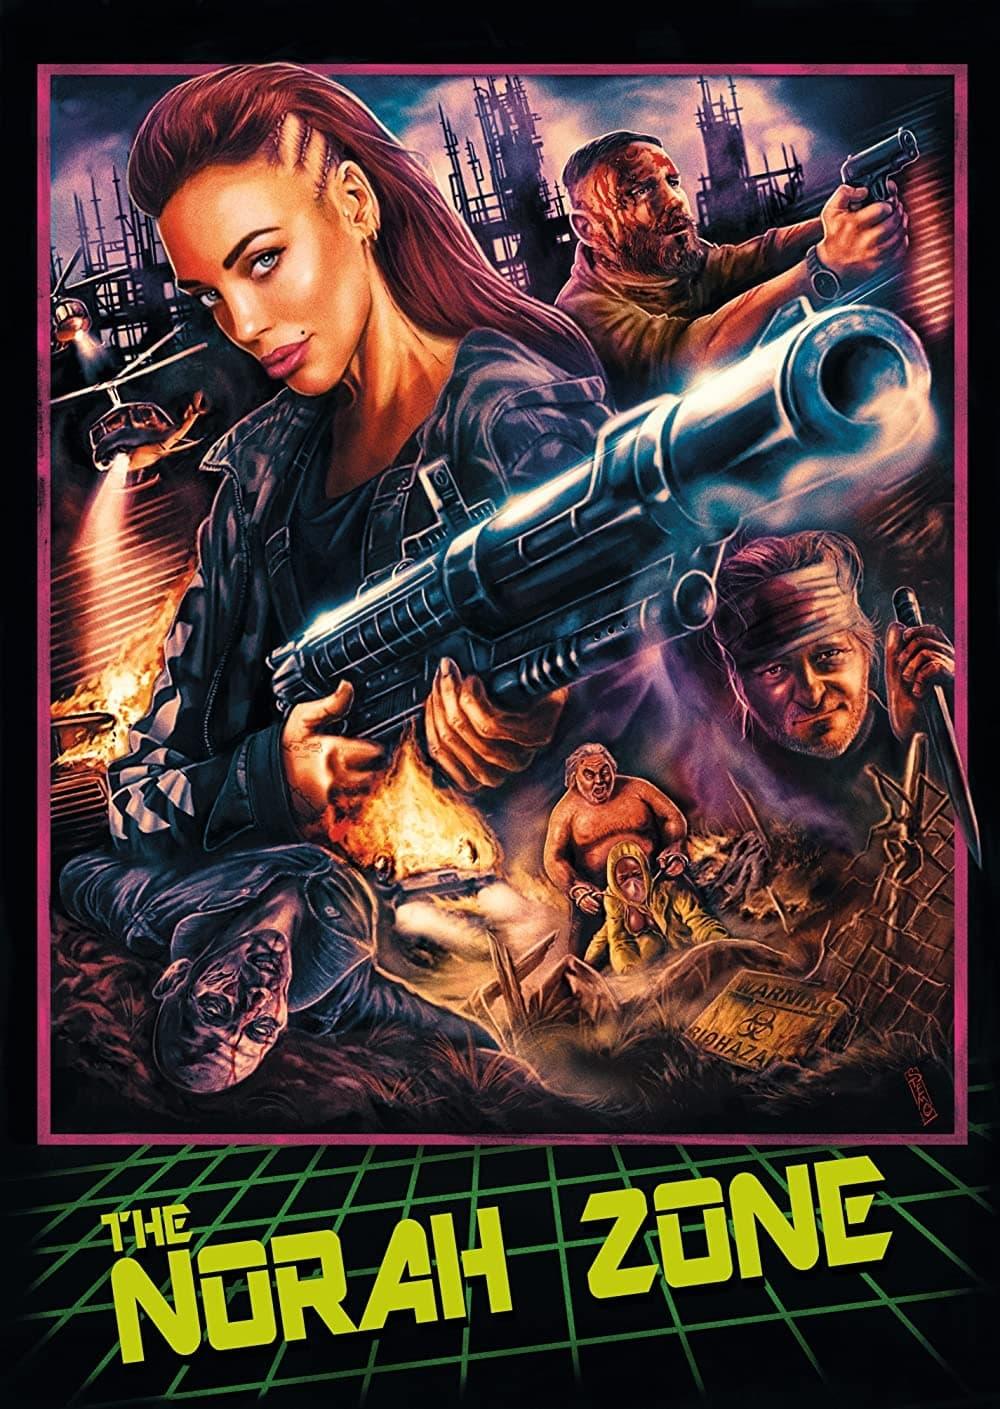 The Norah Zone poster